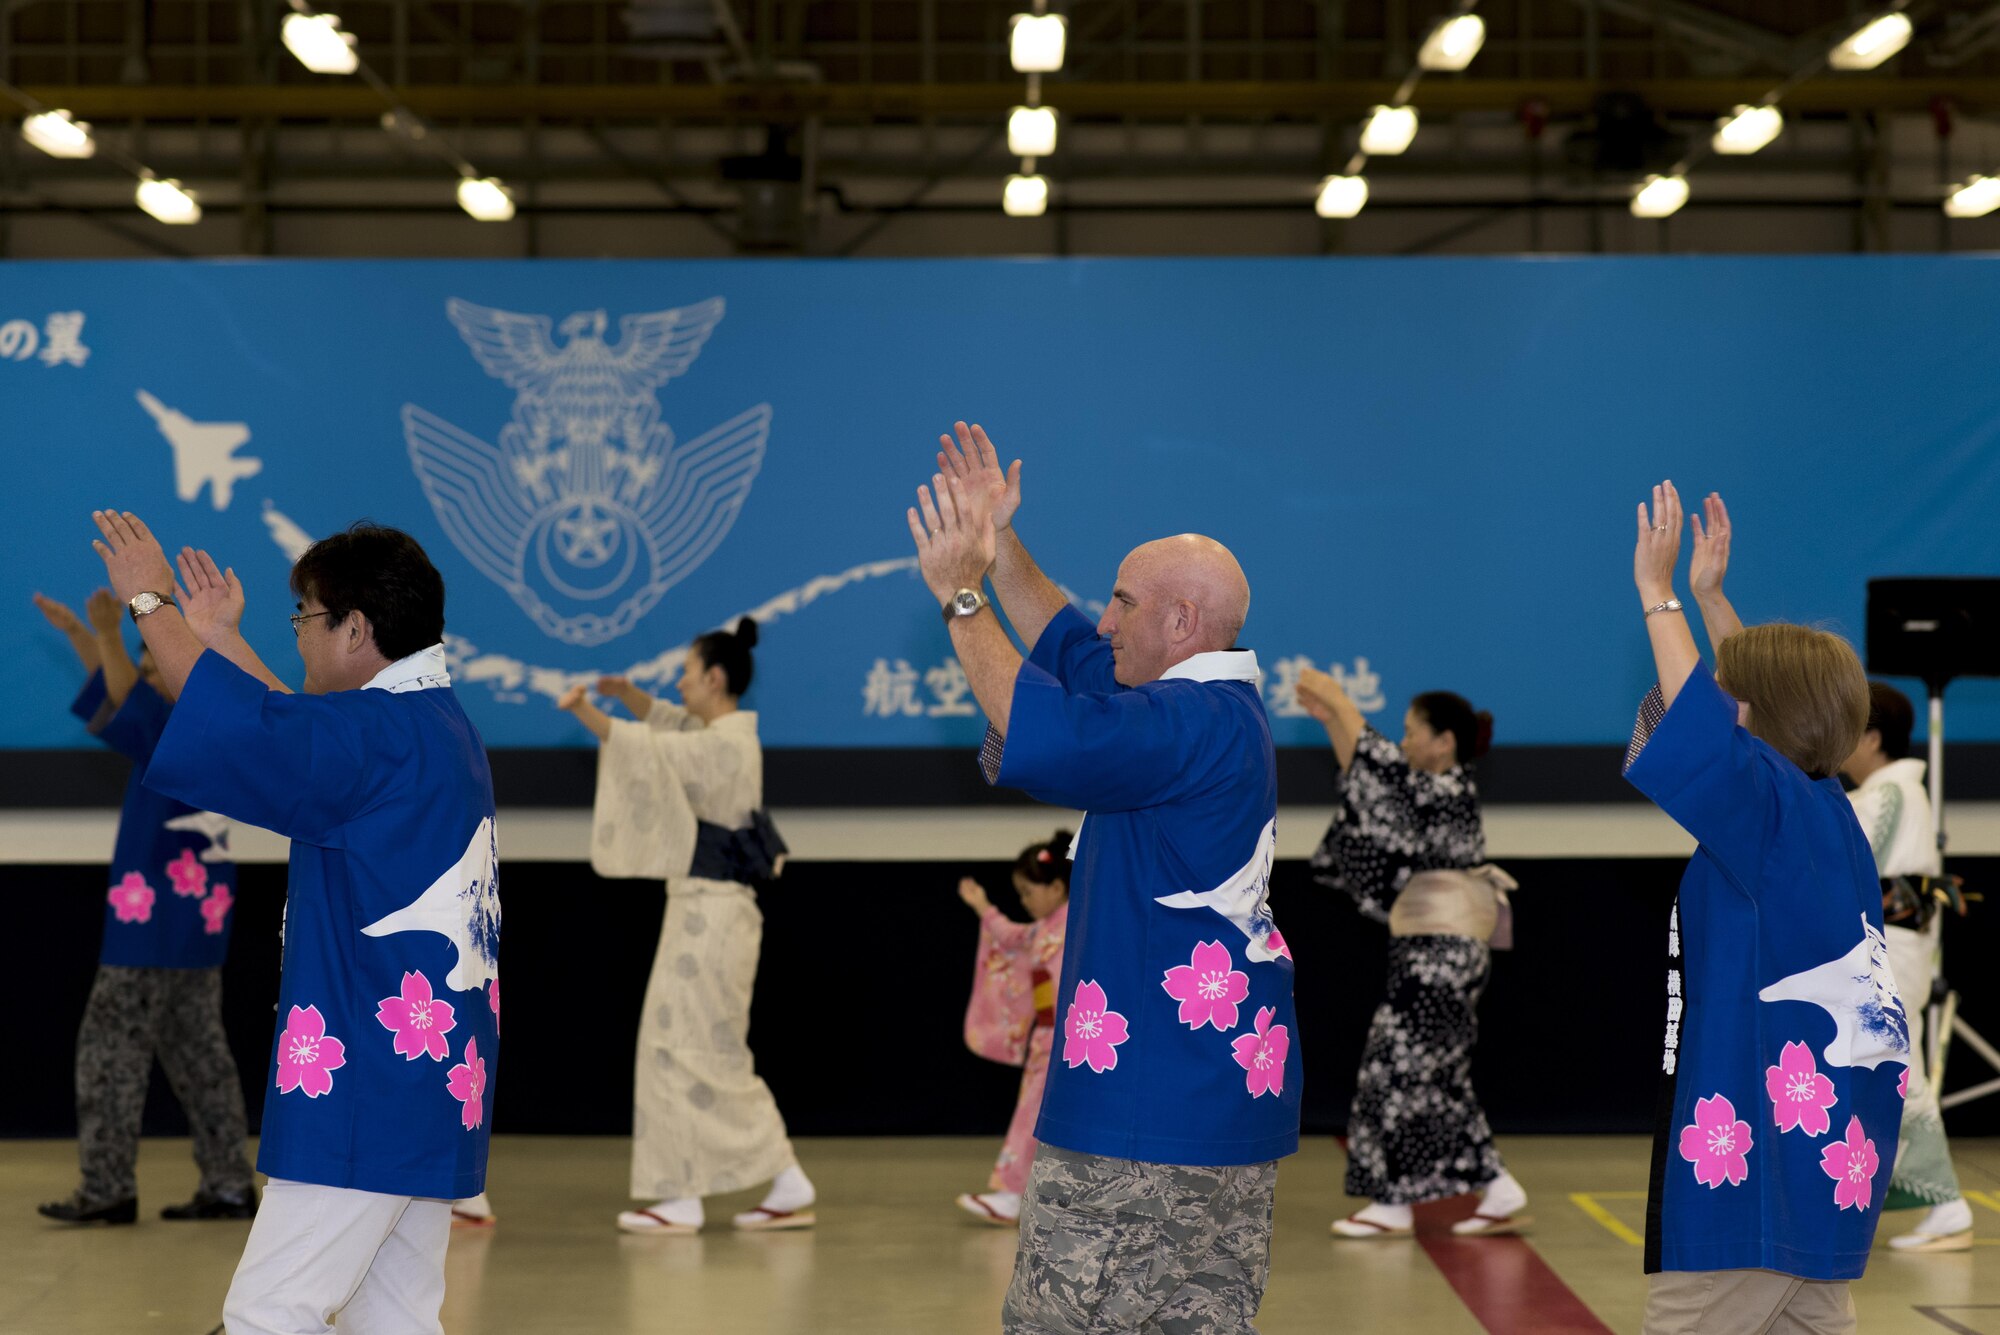 Col. Kenneth Moss, 374th Airlift Wing commander, participates in a Bon dance during the 2016 Friendship Festival at Yokota Air Base, Japan, Sept. 18, 2016. In 2015, more than 185,000 people attended. (U.S. Air Force photo by Staff Sgt. Michael Washburn/Released)